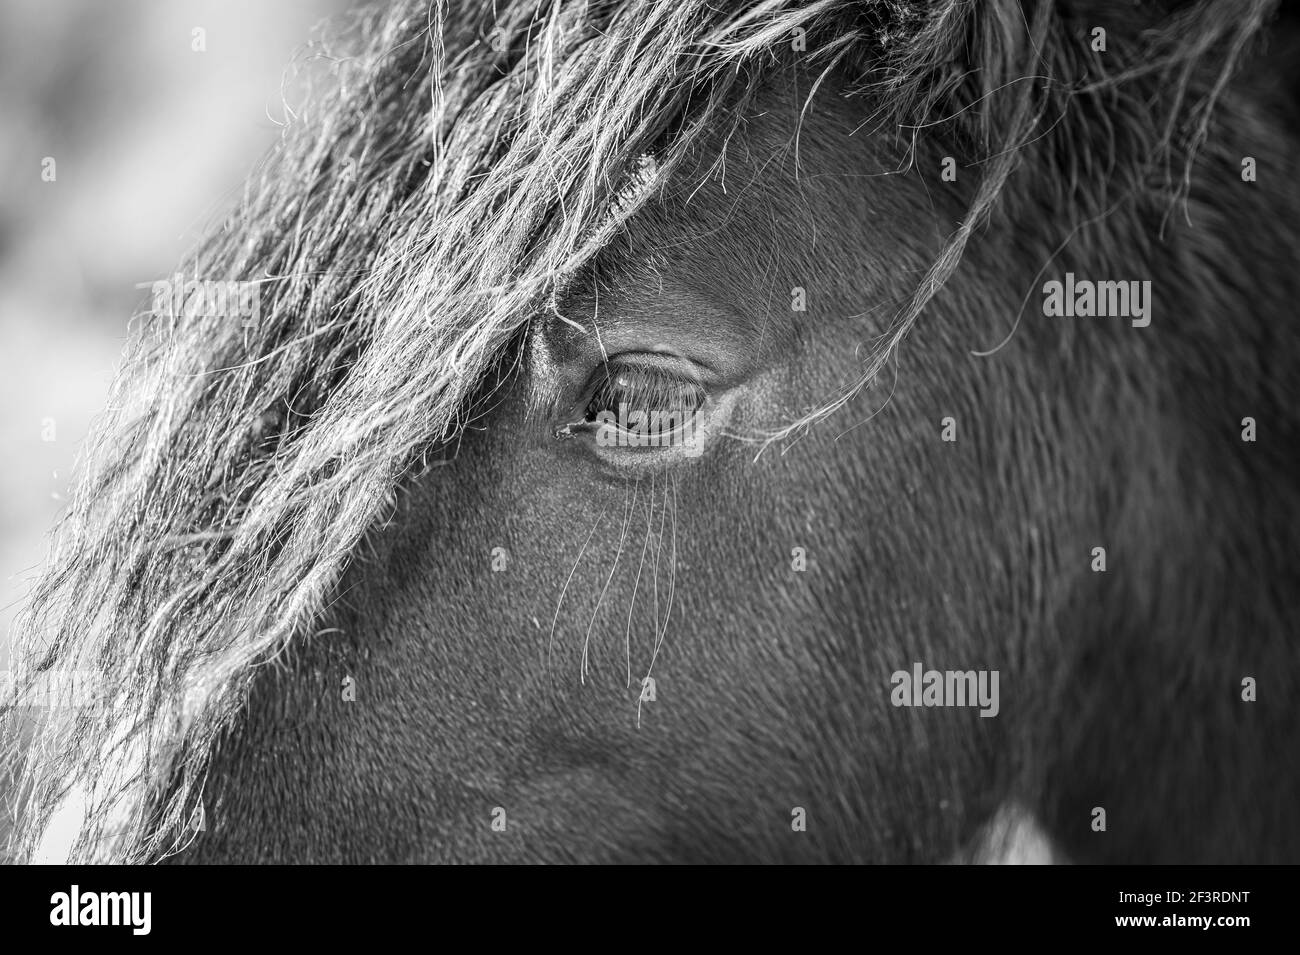 Close up of a wild horse. Focus is on the eye. Black & White Stock Photo